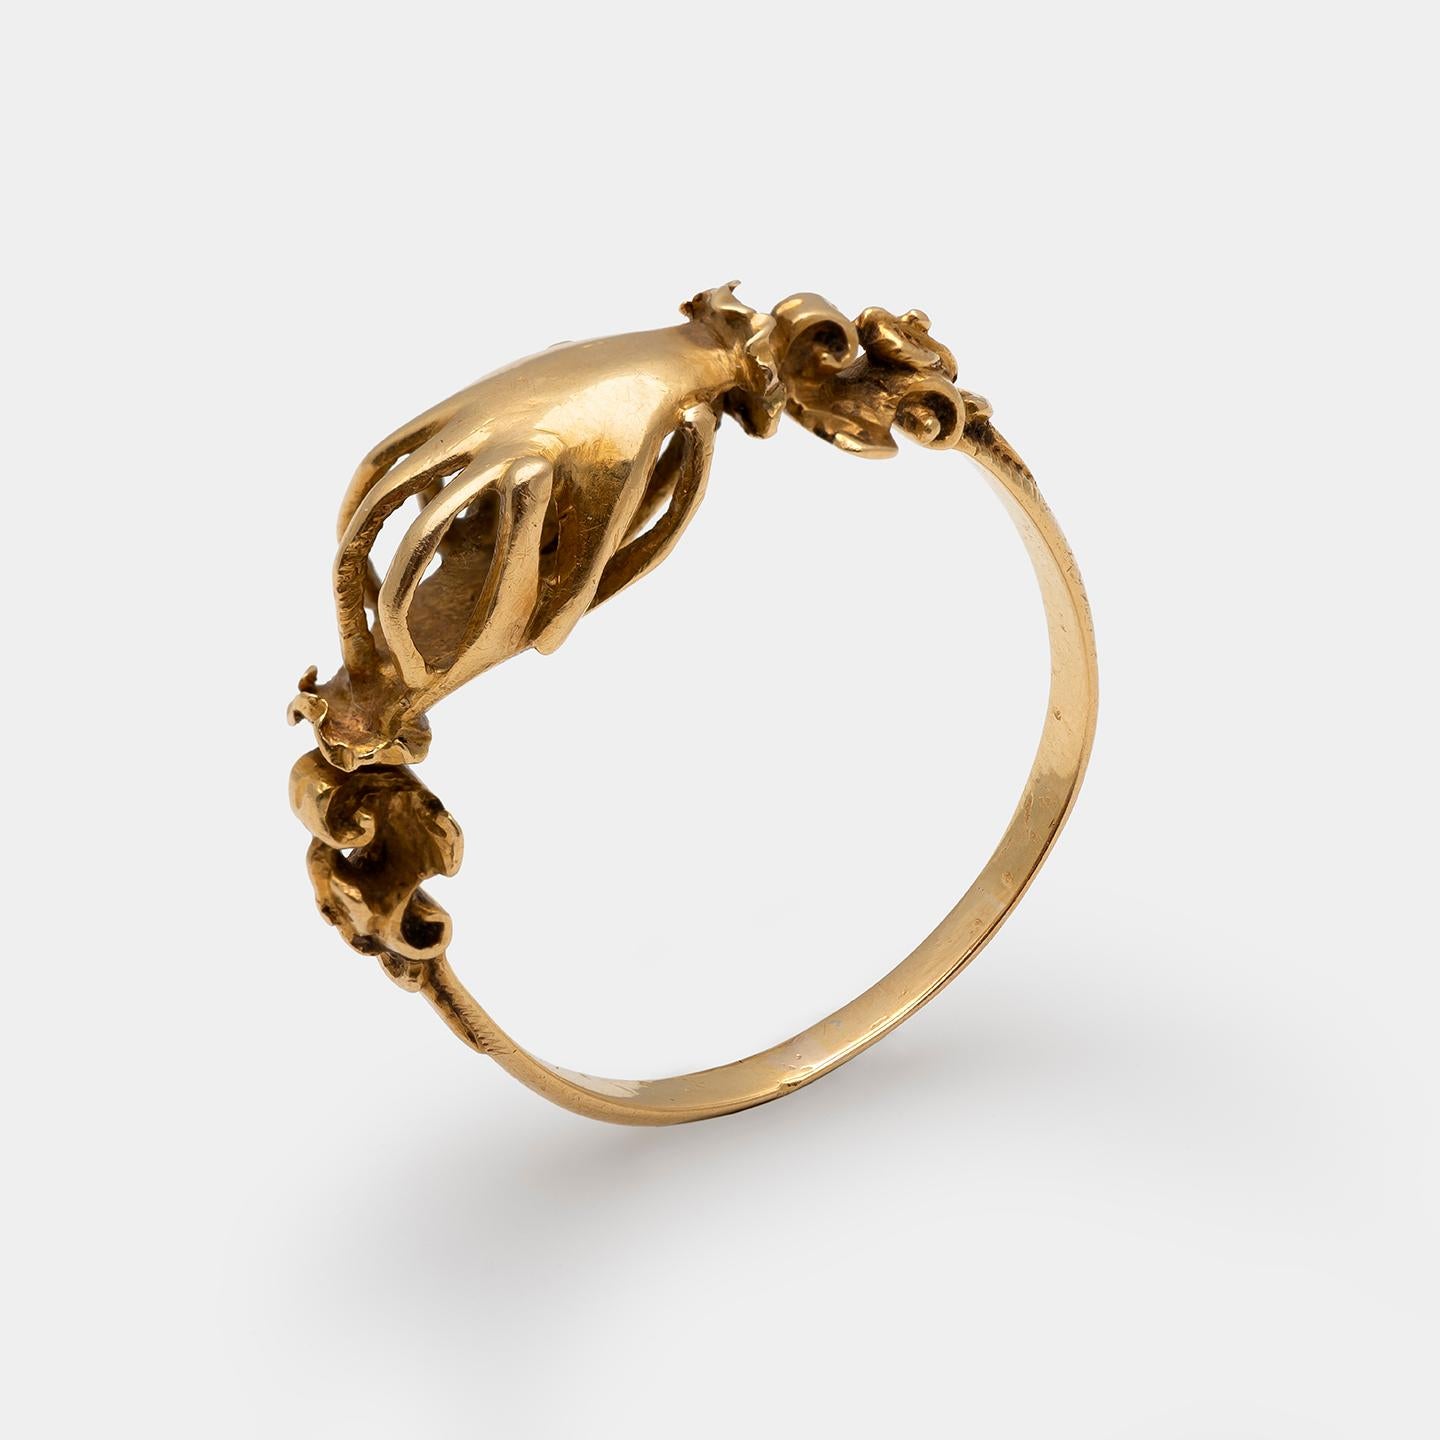 Antique Renaissance Gold Fede Ring In Good Condition For Sale In Chicago, IL